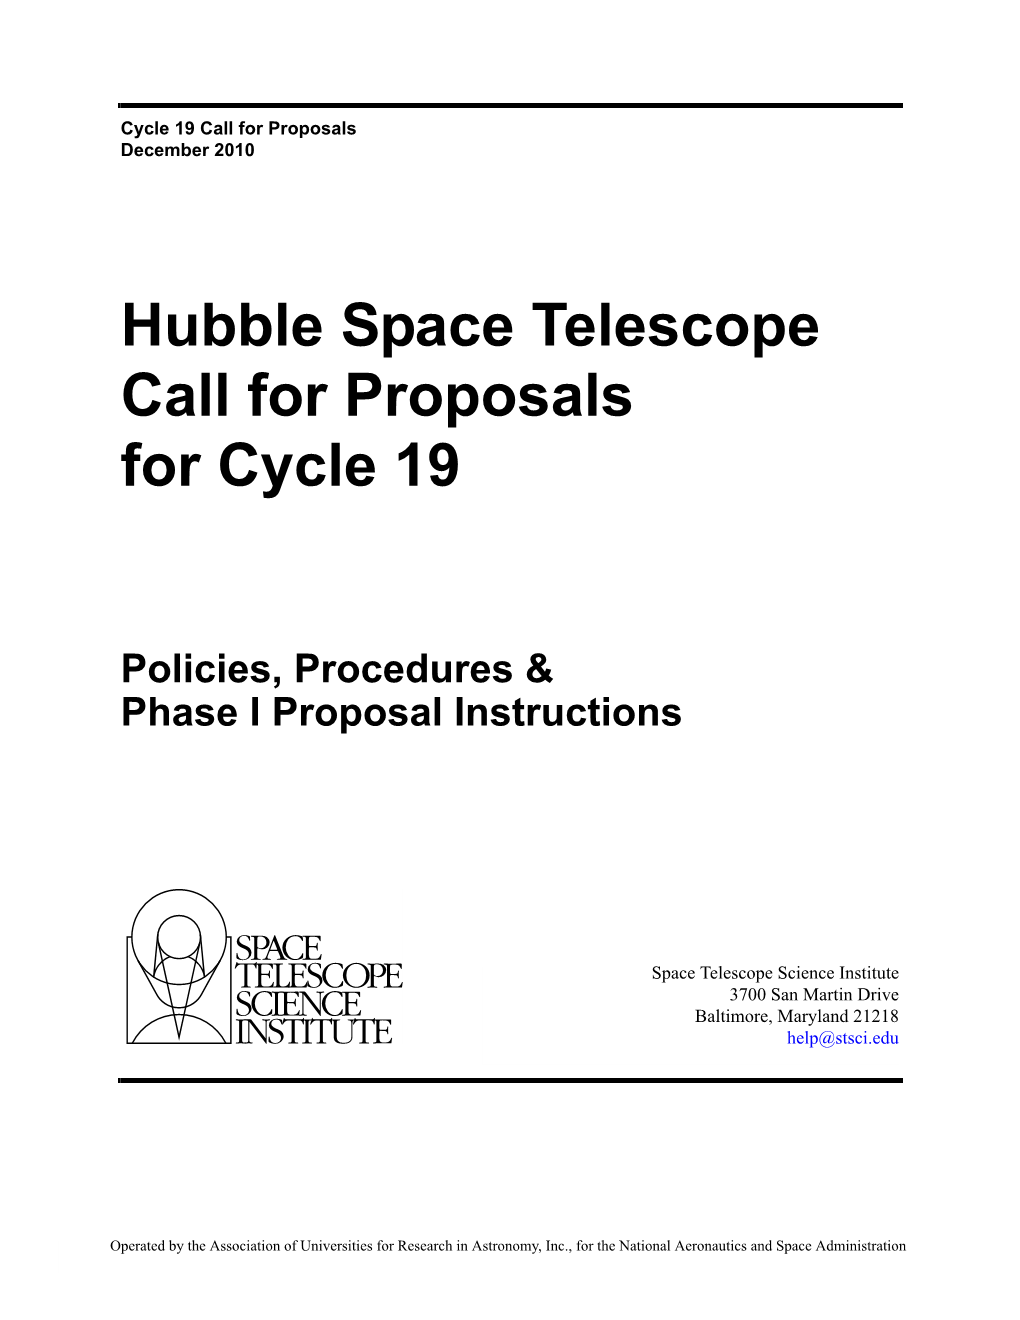 Hubble Space Telescope Call for Proposals for Cycle 19